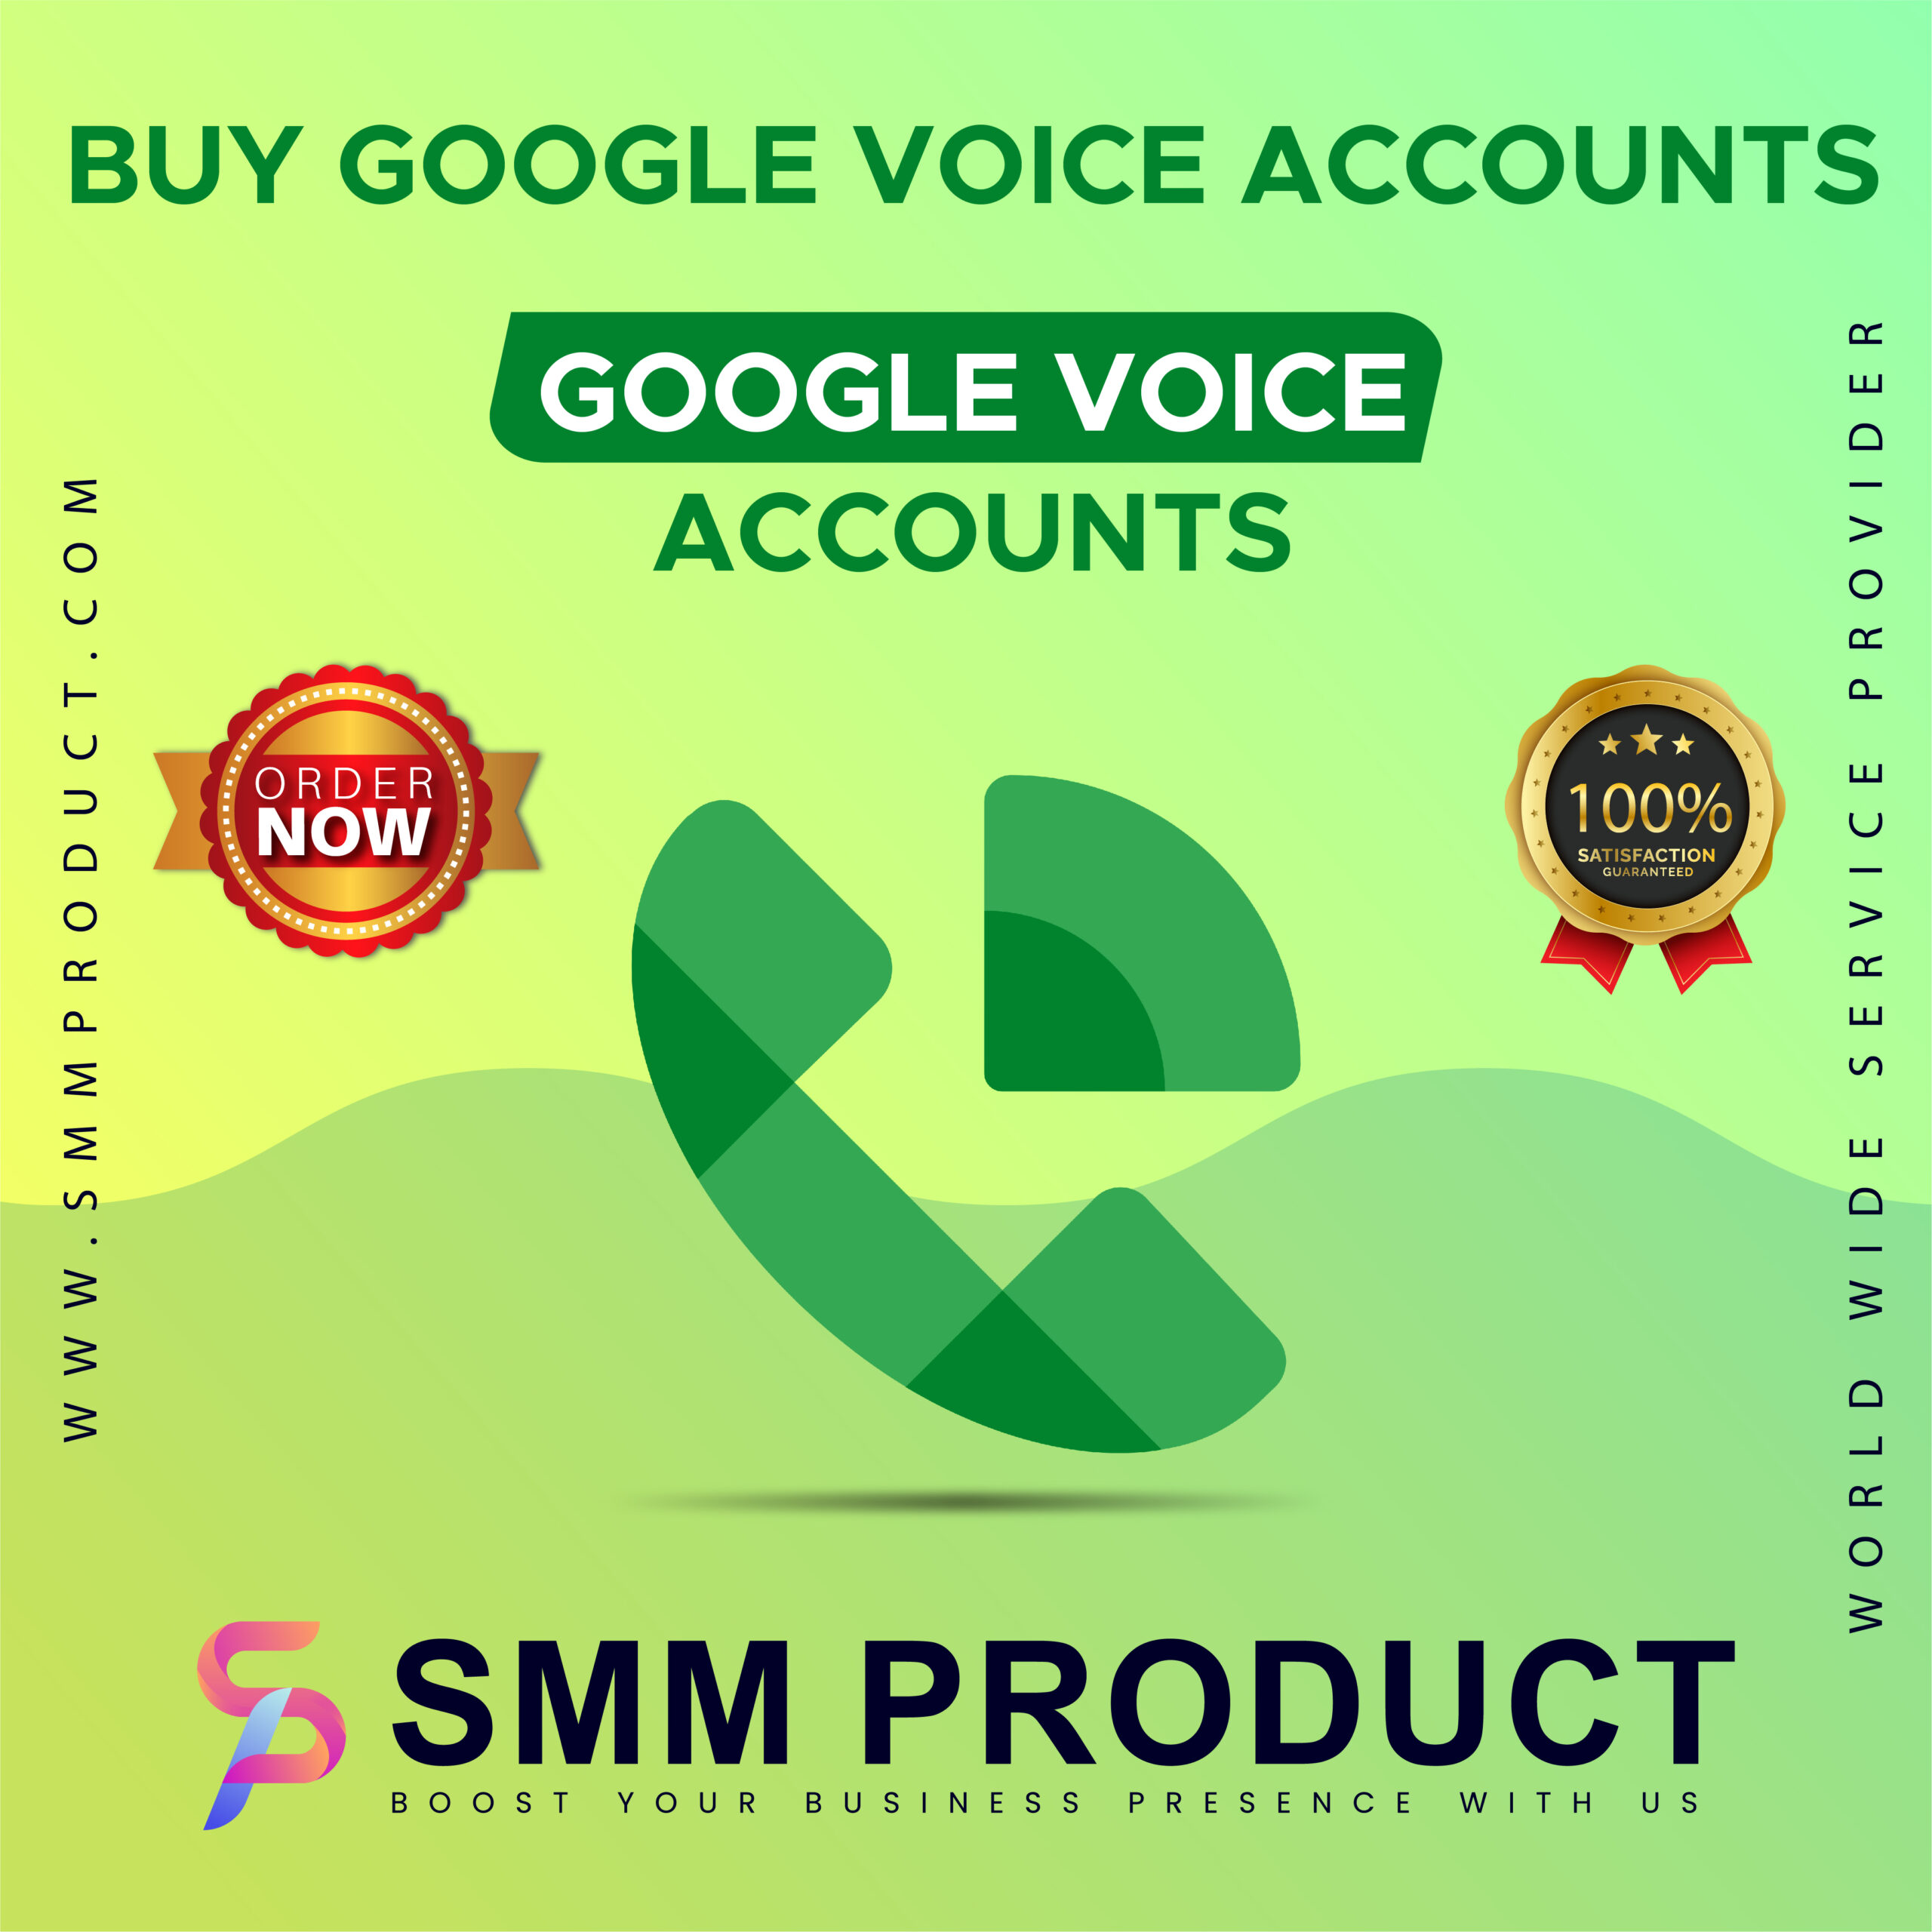 Buy Google Voice Accounts - 100% trusted USA Phone Number..